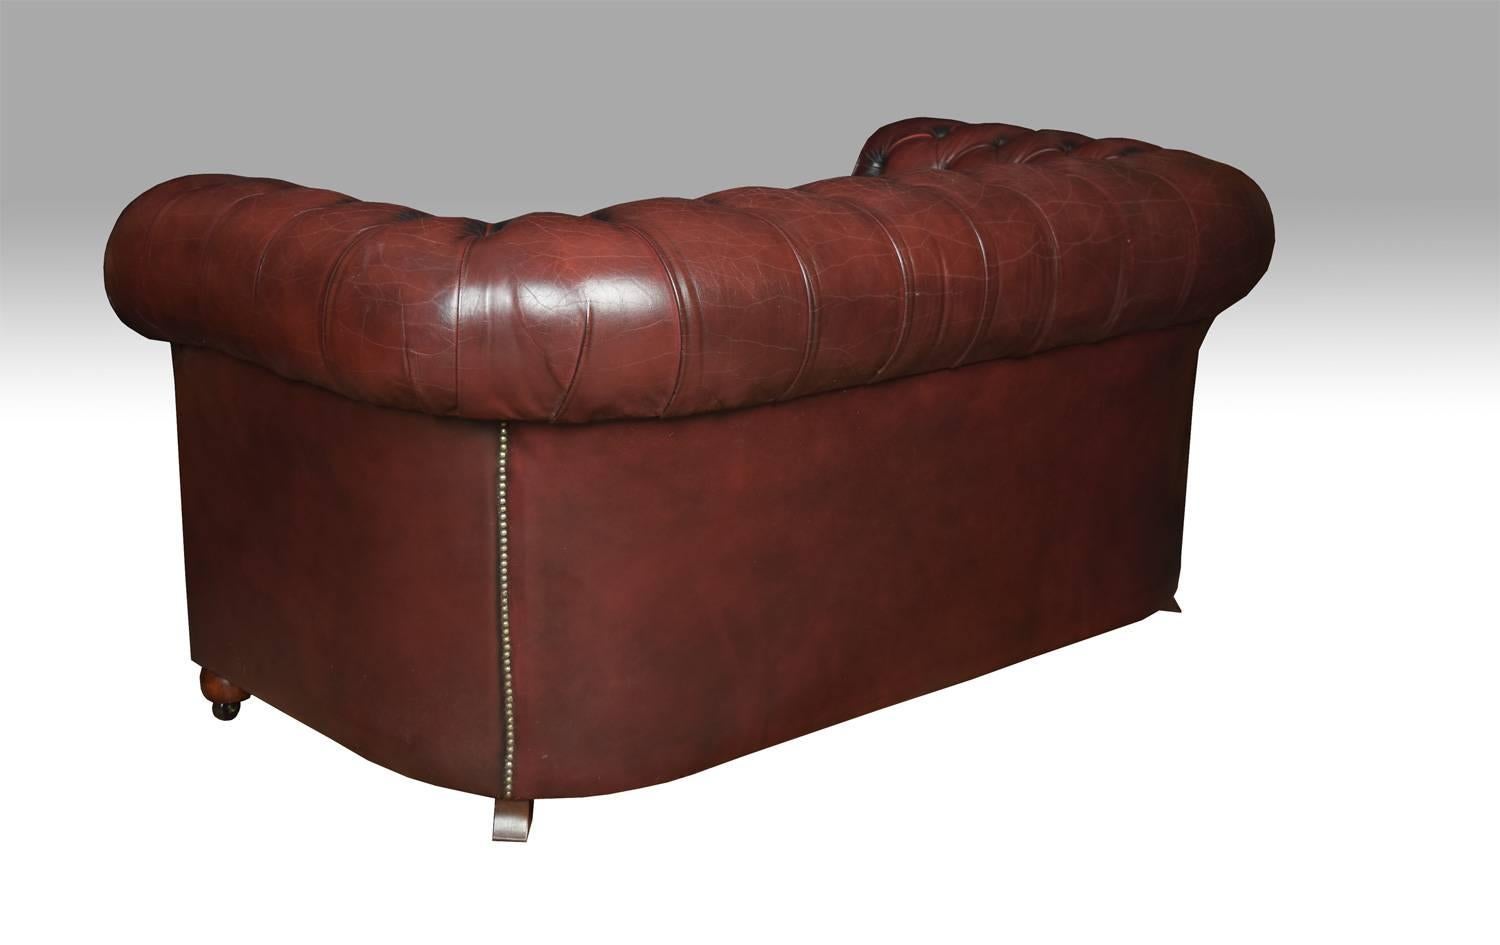 20th Century Burgundy Leather Chesterfield